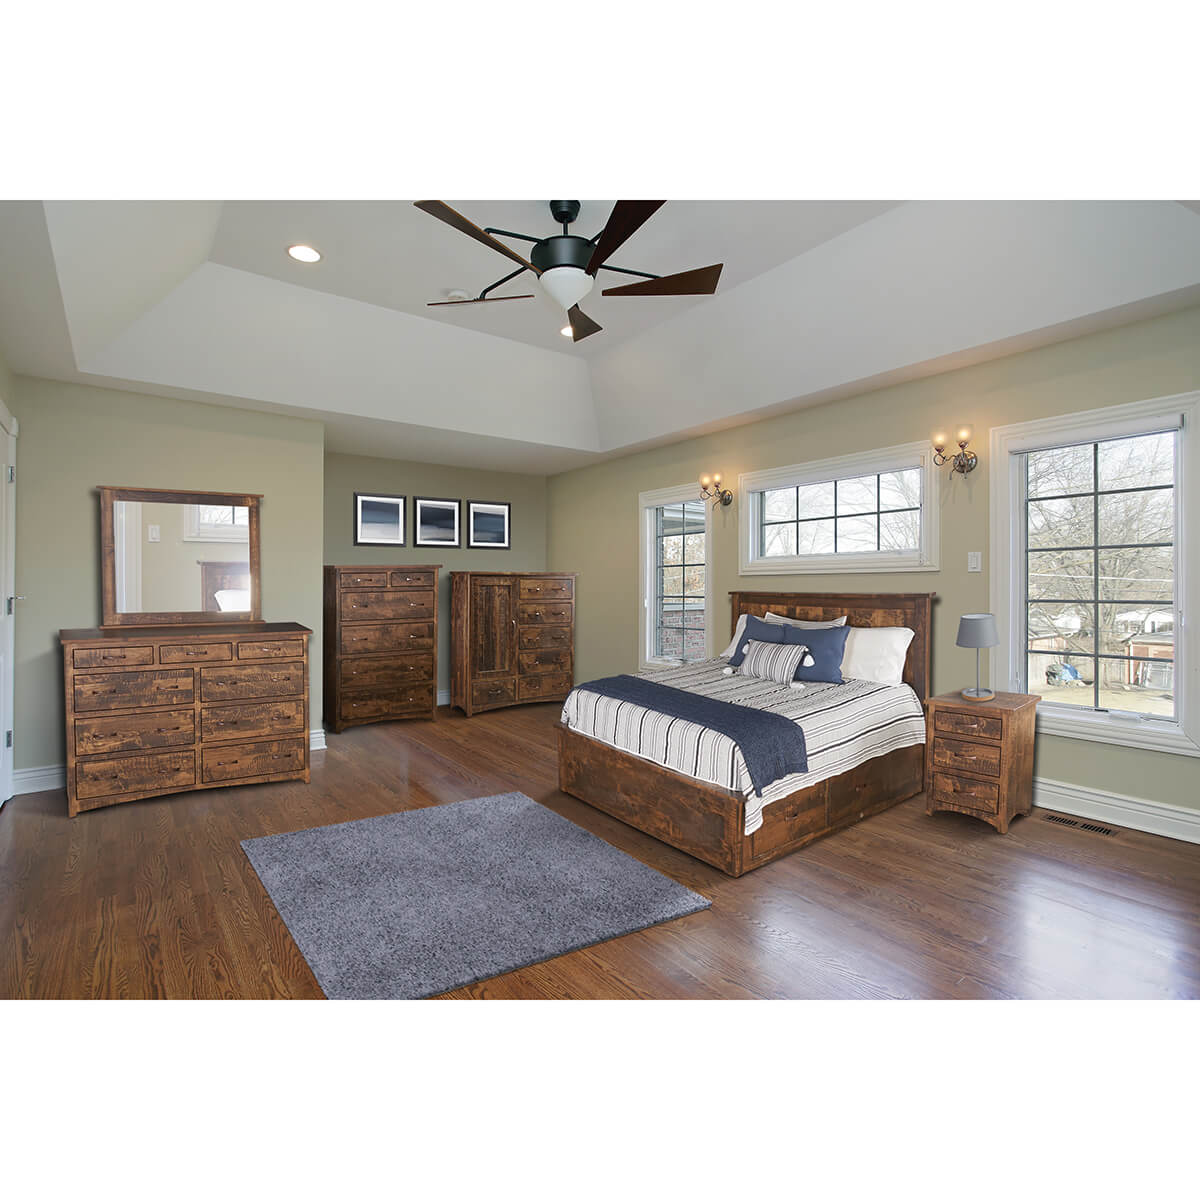 GrandpasBedroomCollection125585